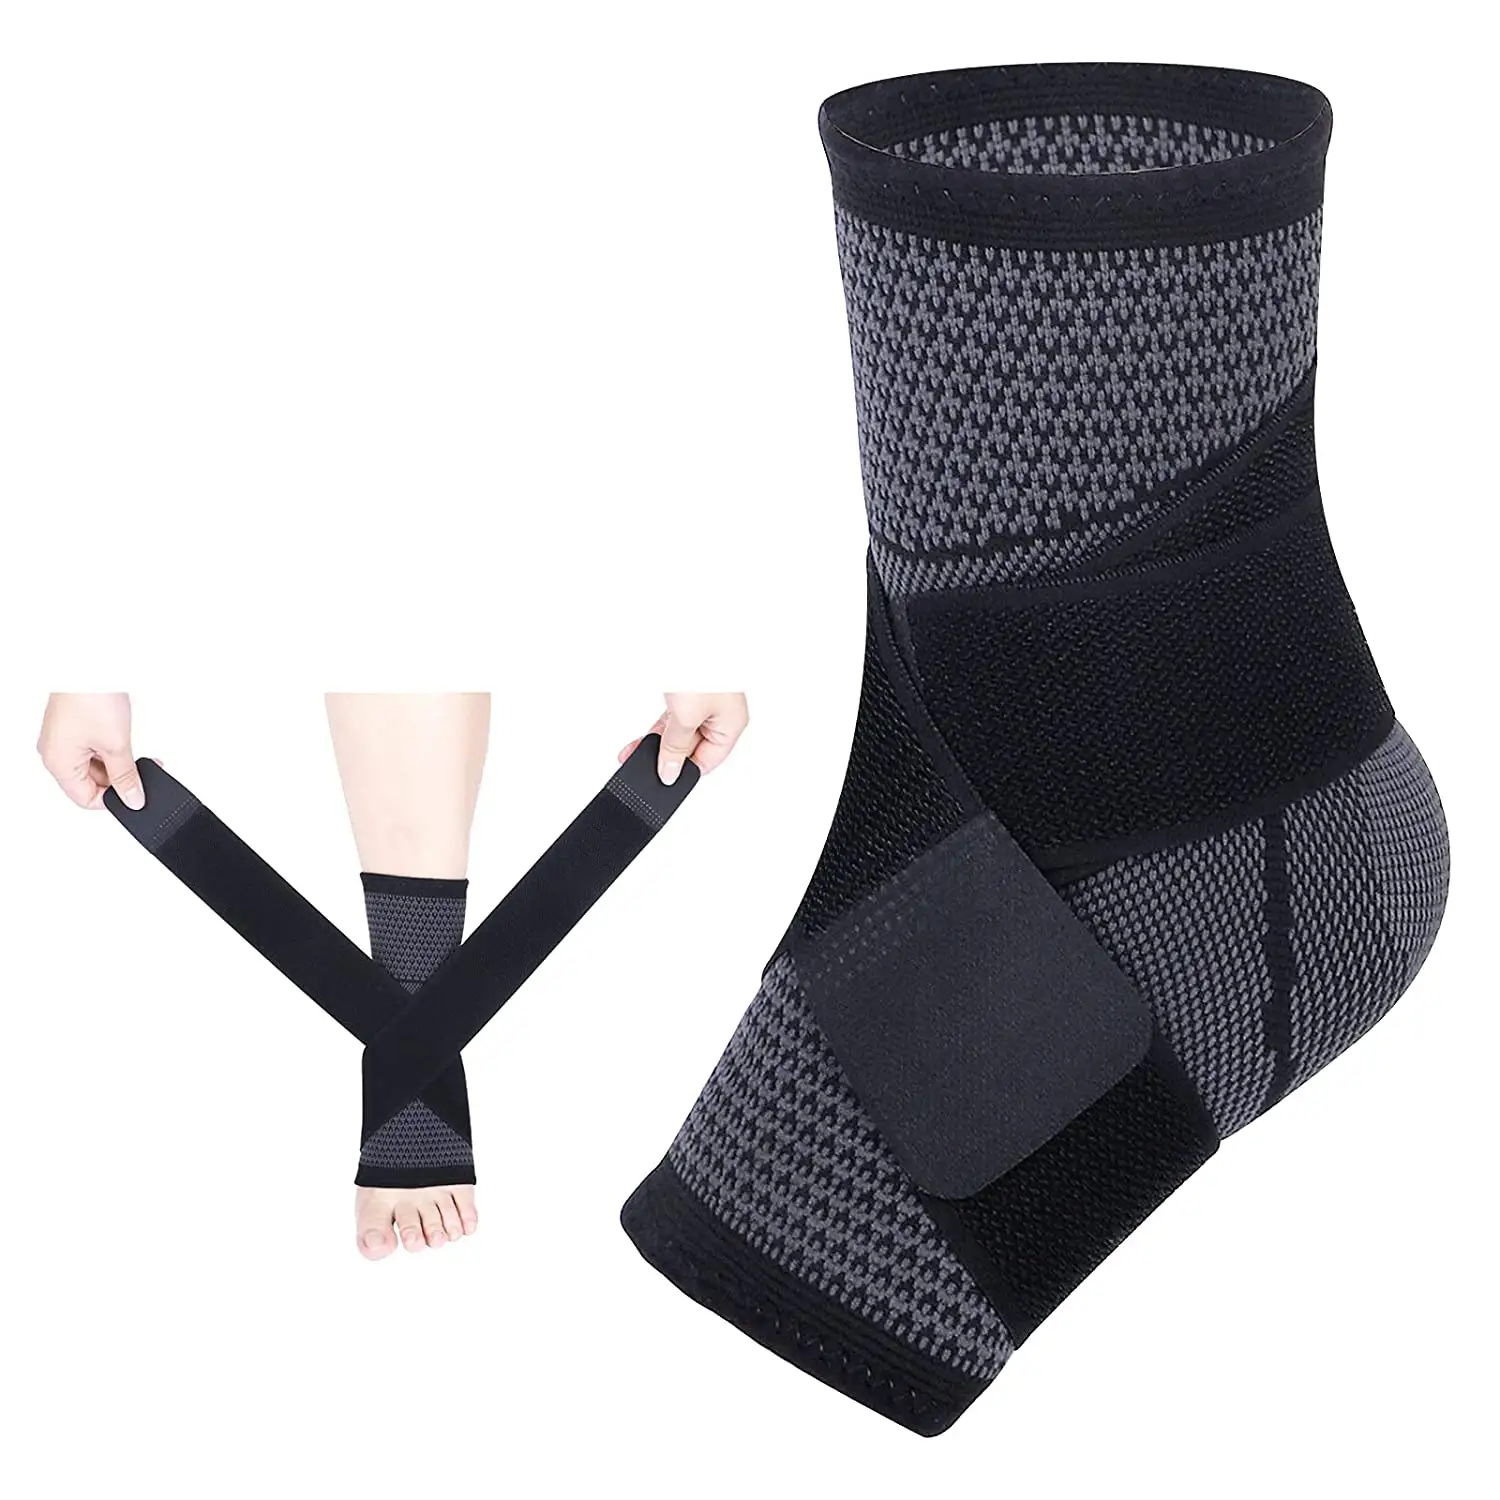 Double Pressure Straps Sports Support Elastic Bands Neoprene Orthopedic Ankle Brace Wraps